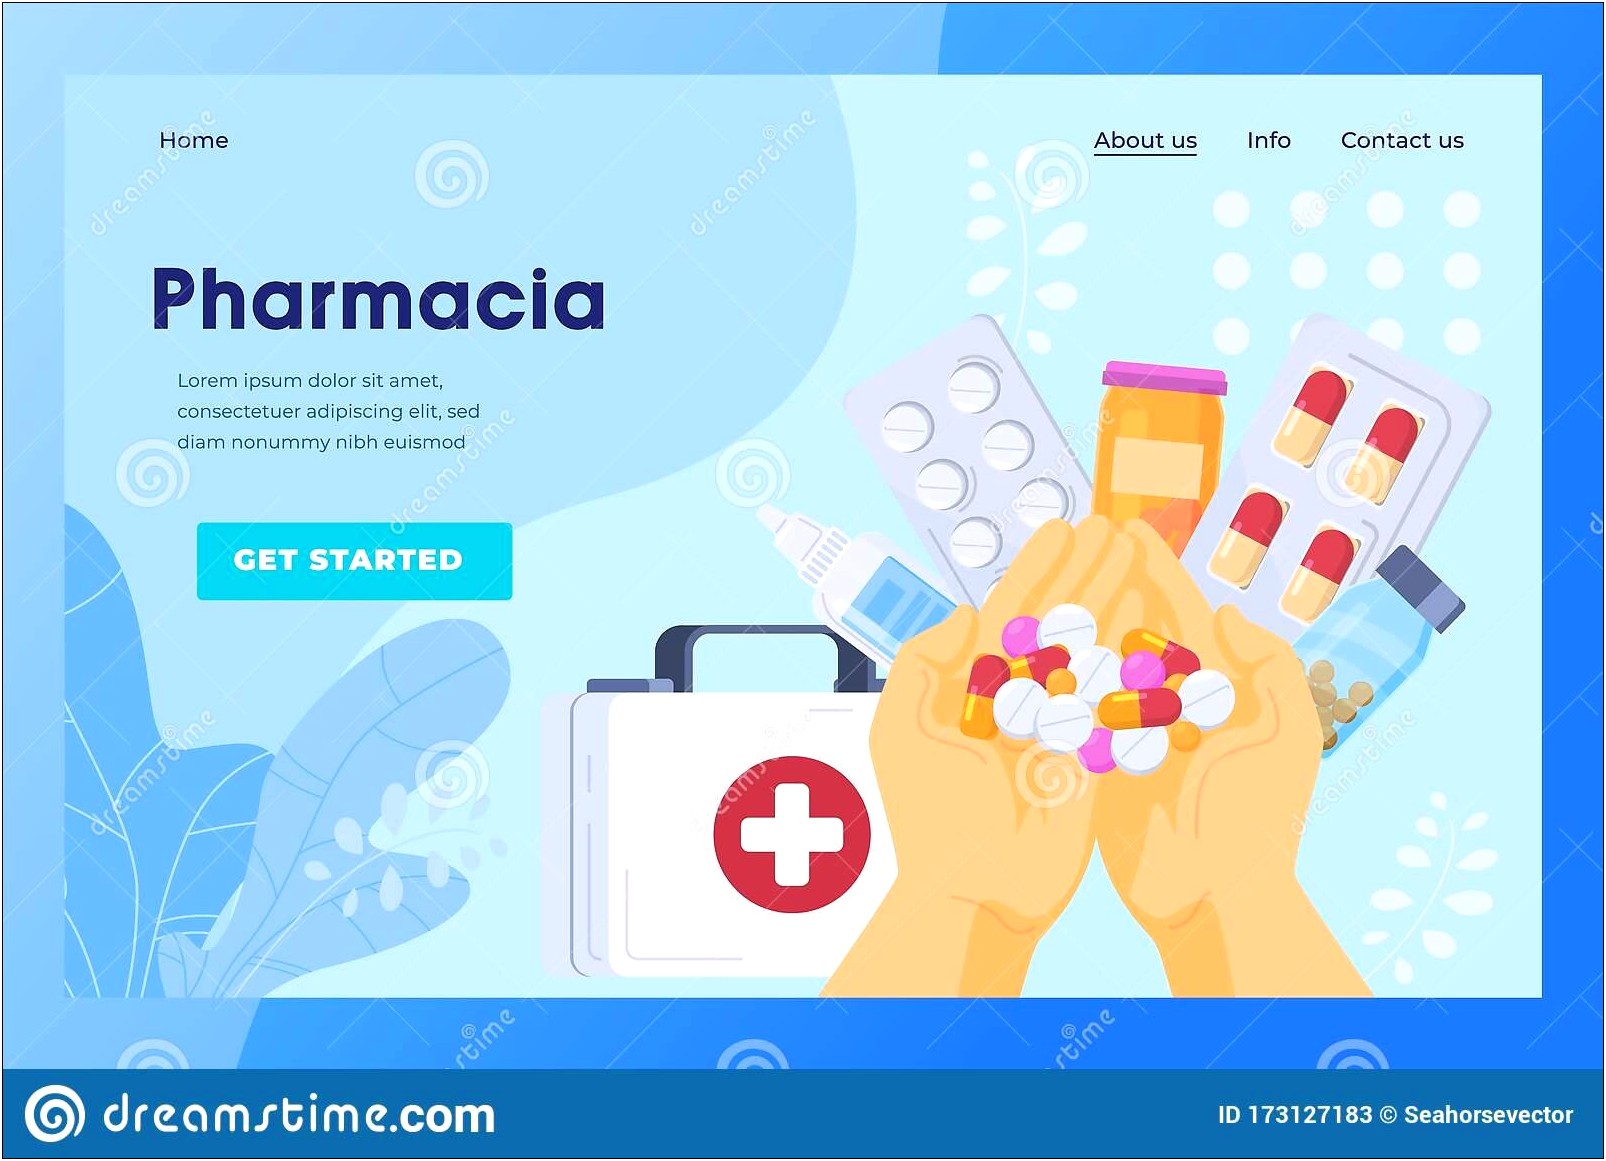 Online Medical Store Template Free Download